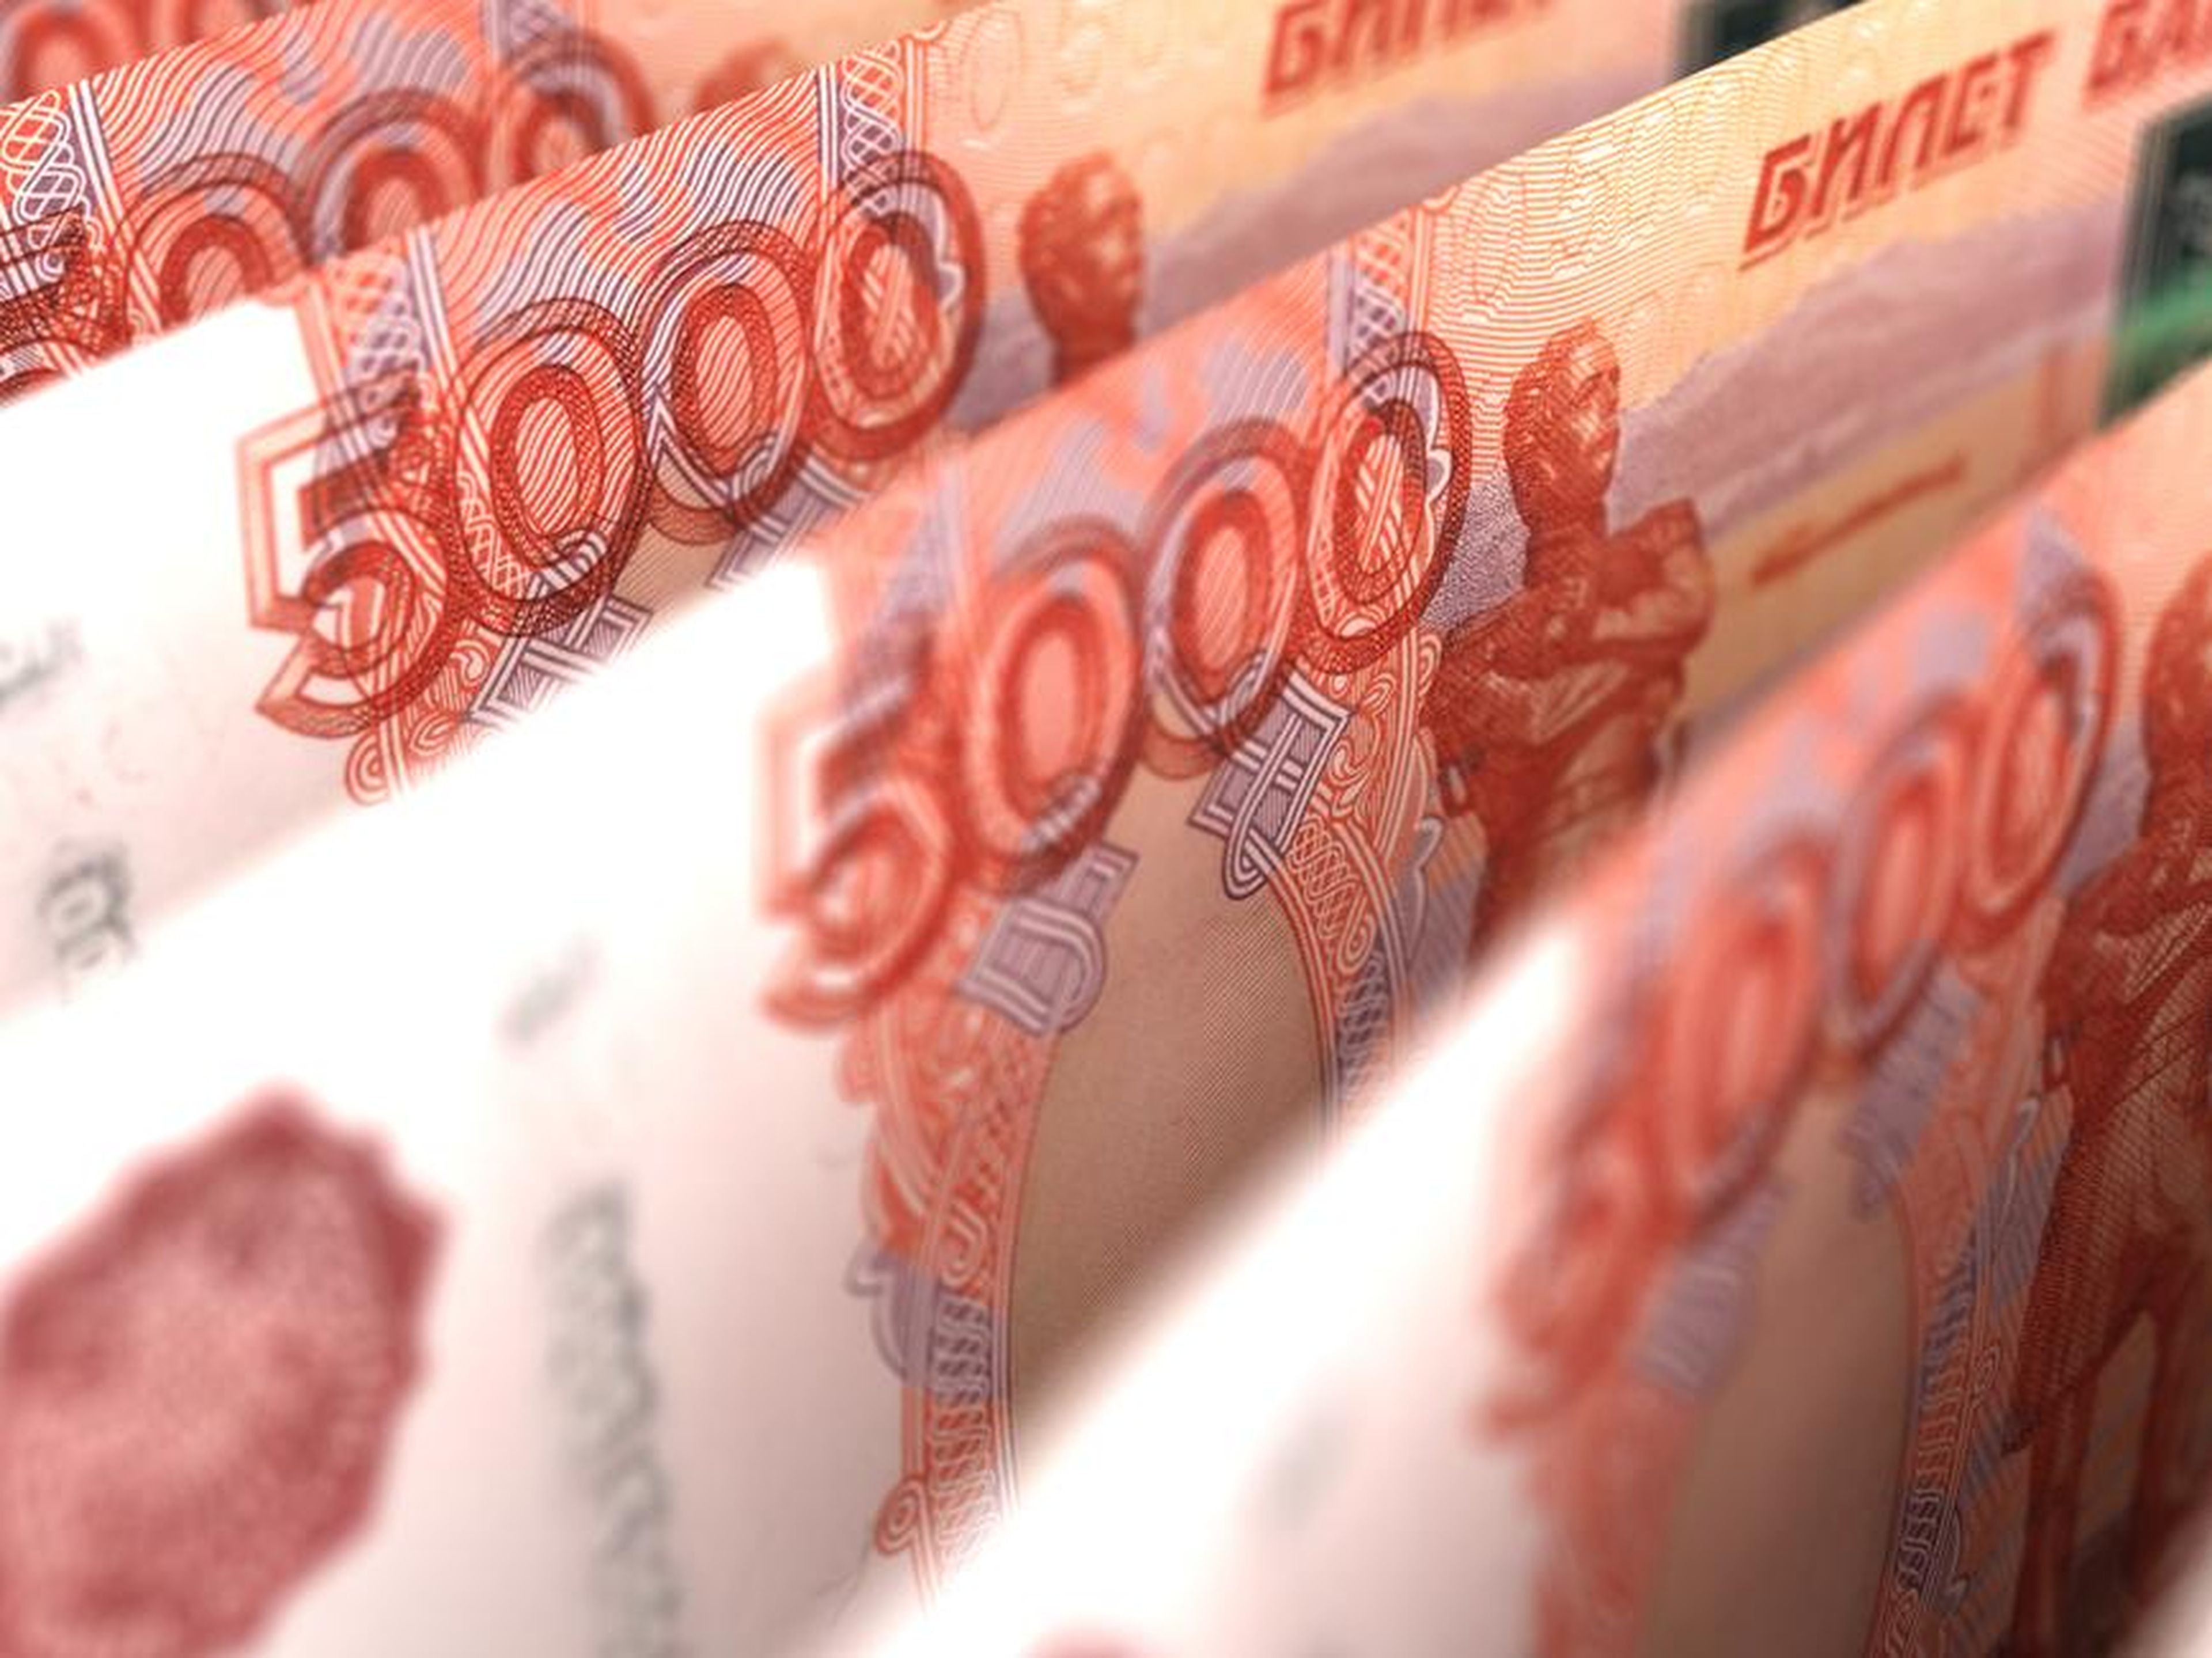 Russia has more than $460 billion in reserve funds